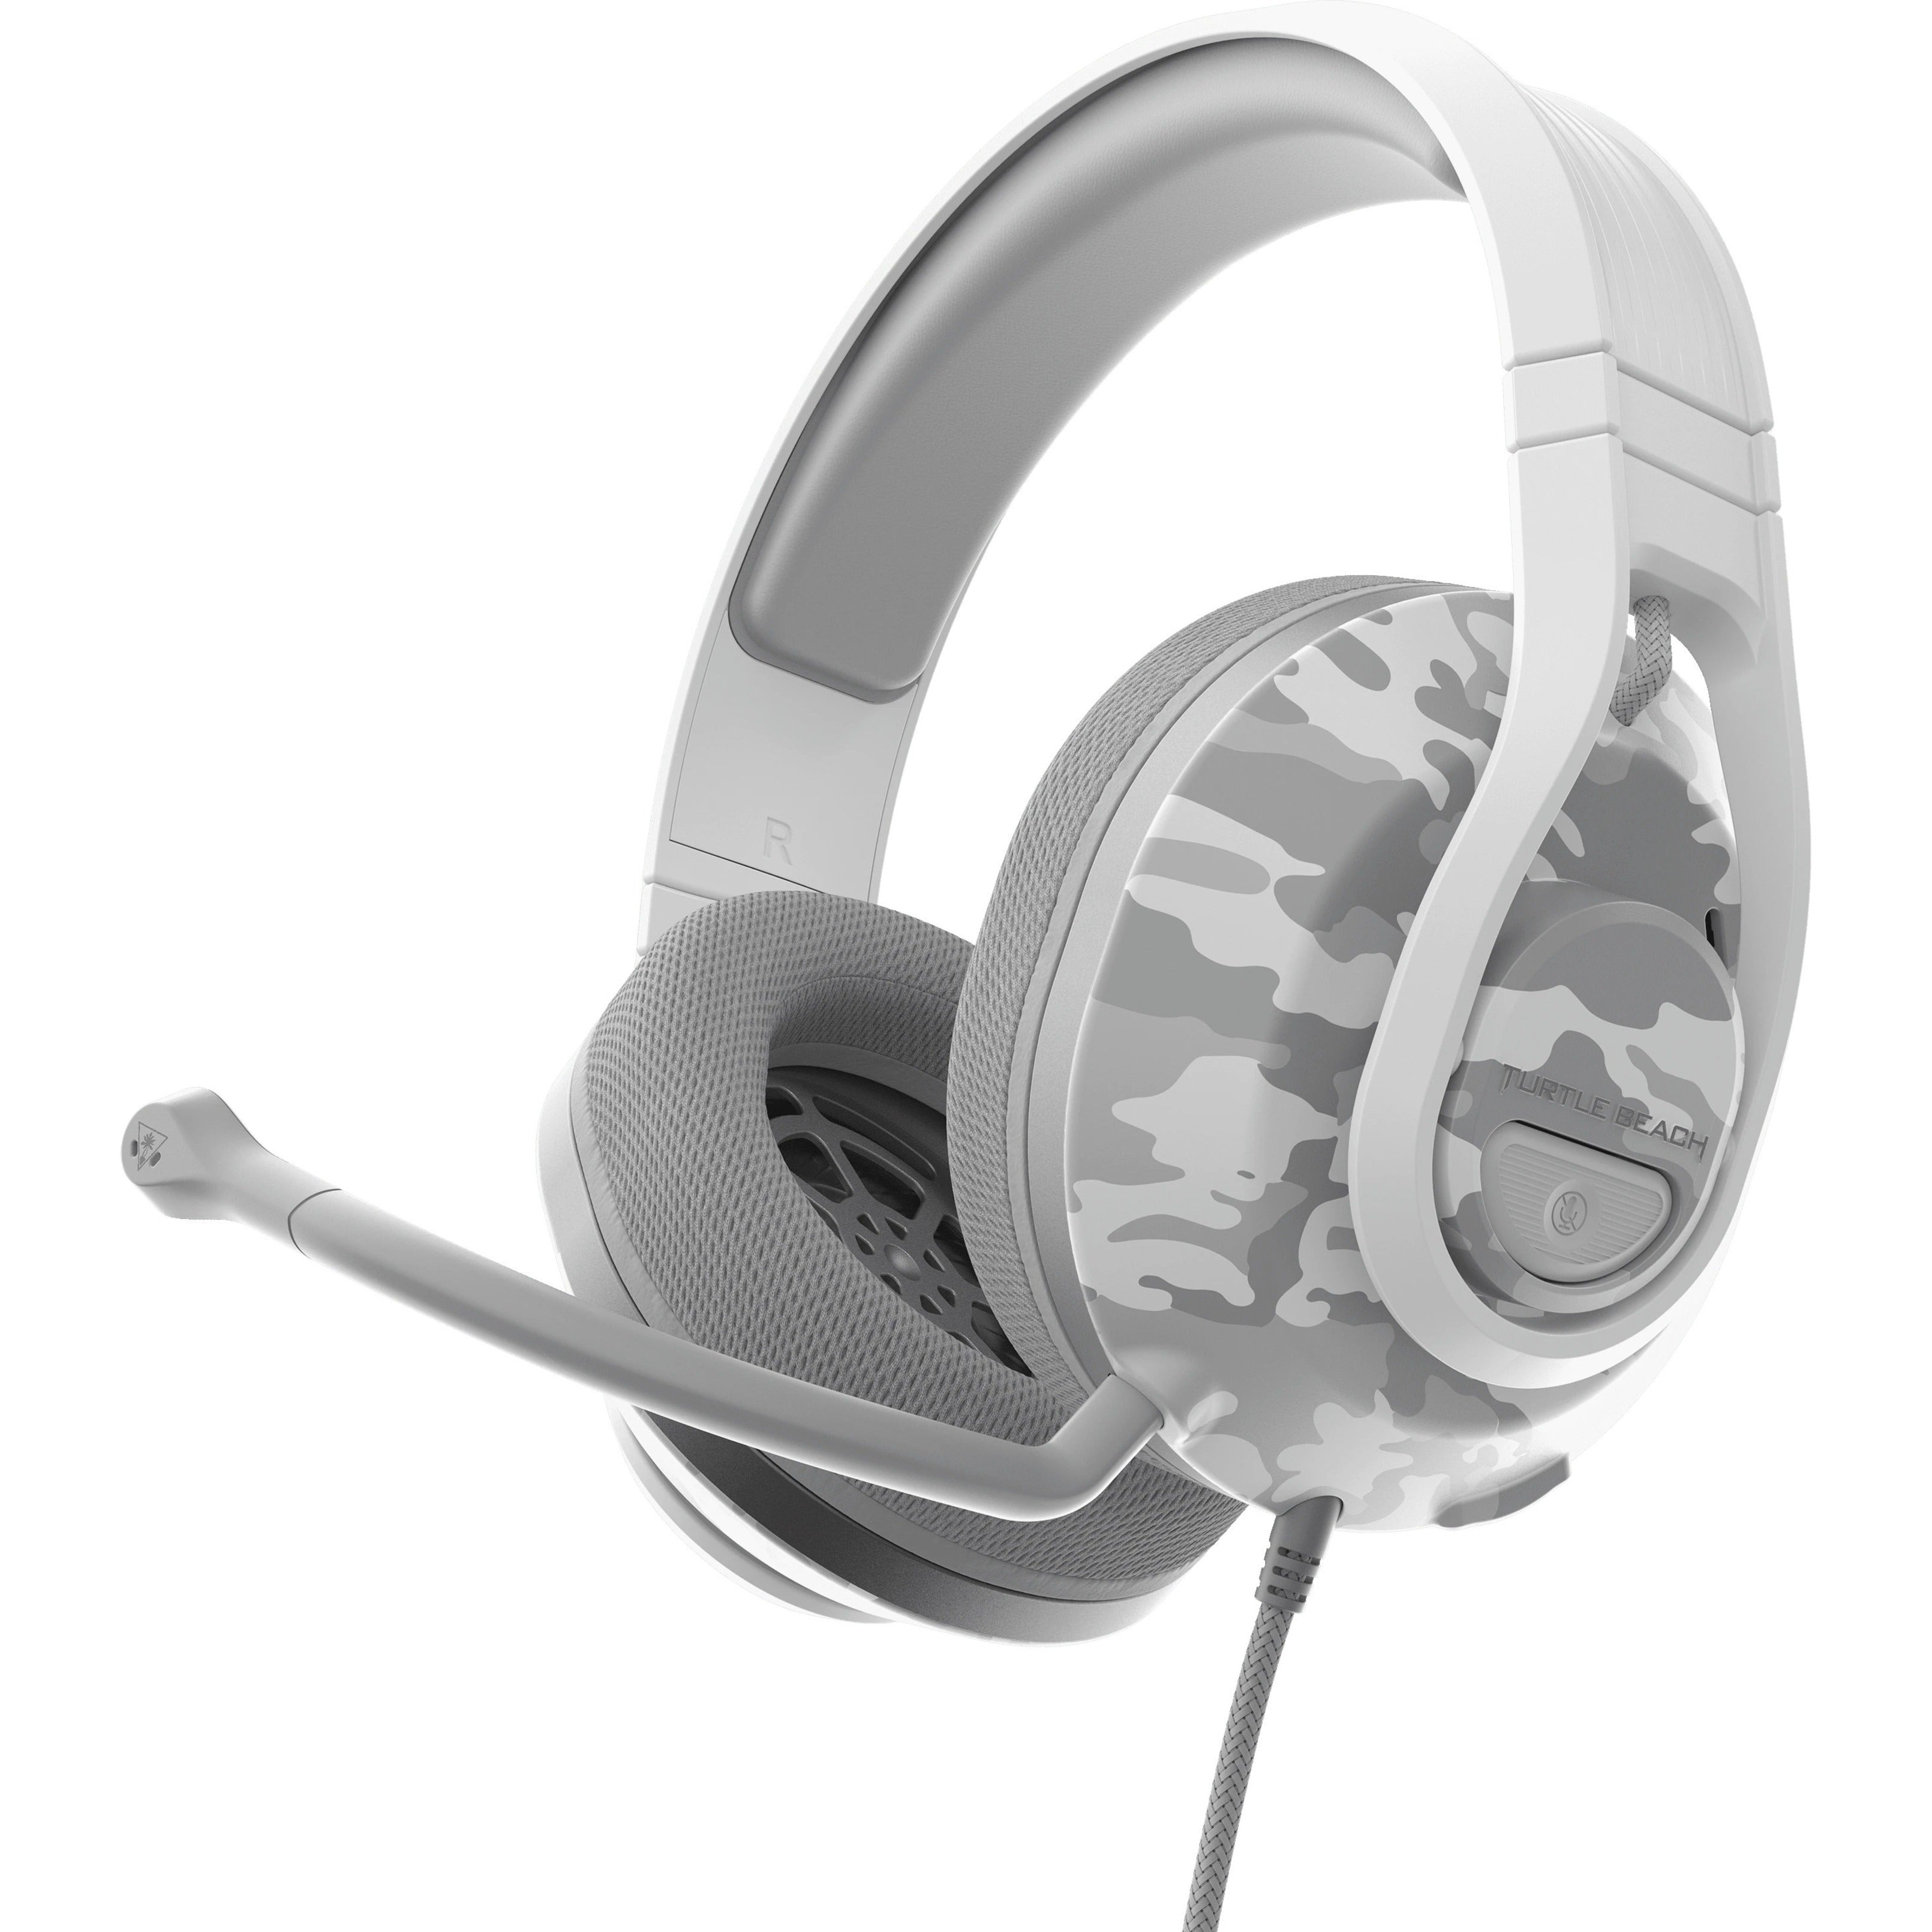 Turtle Beach TBS-6405-01 Recon 500 Headset - Arctic Camo, Gaming Headset with Adjustable Headband, Detachable Microphone, Stereo Sound